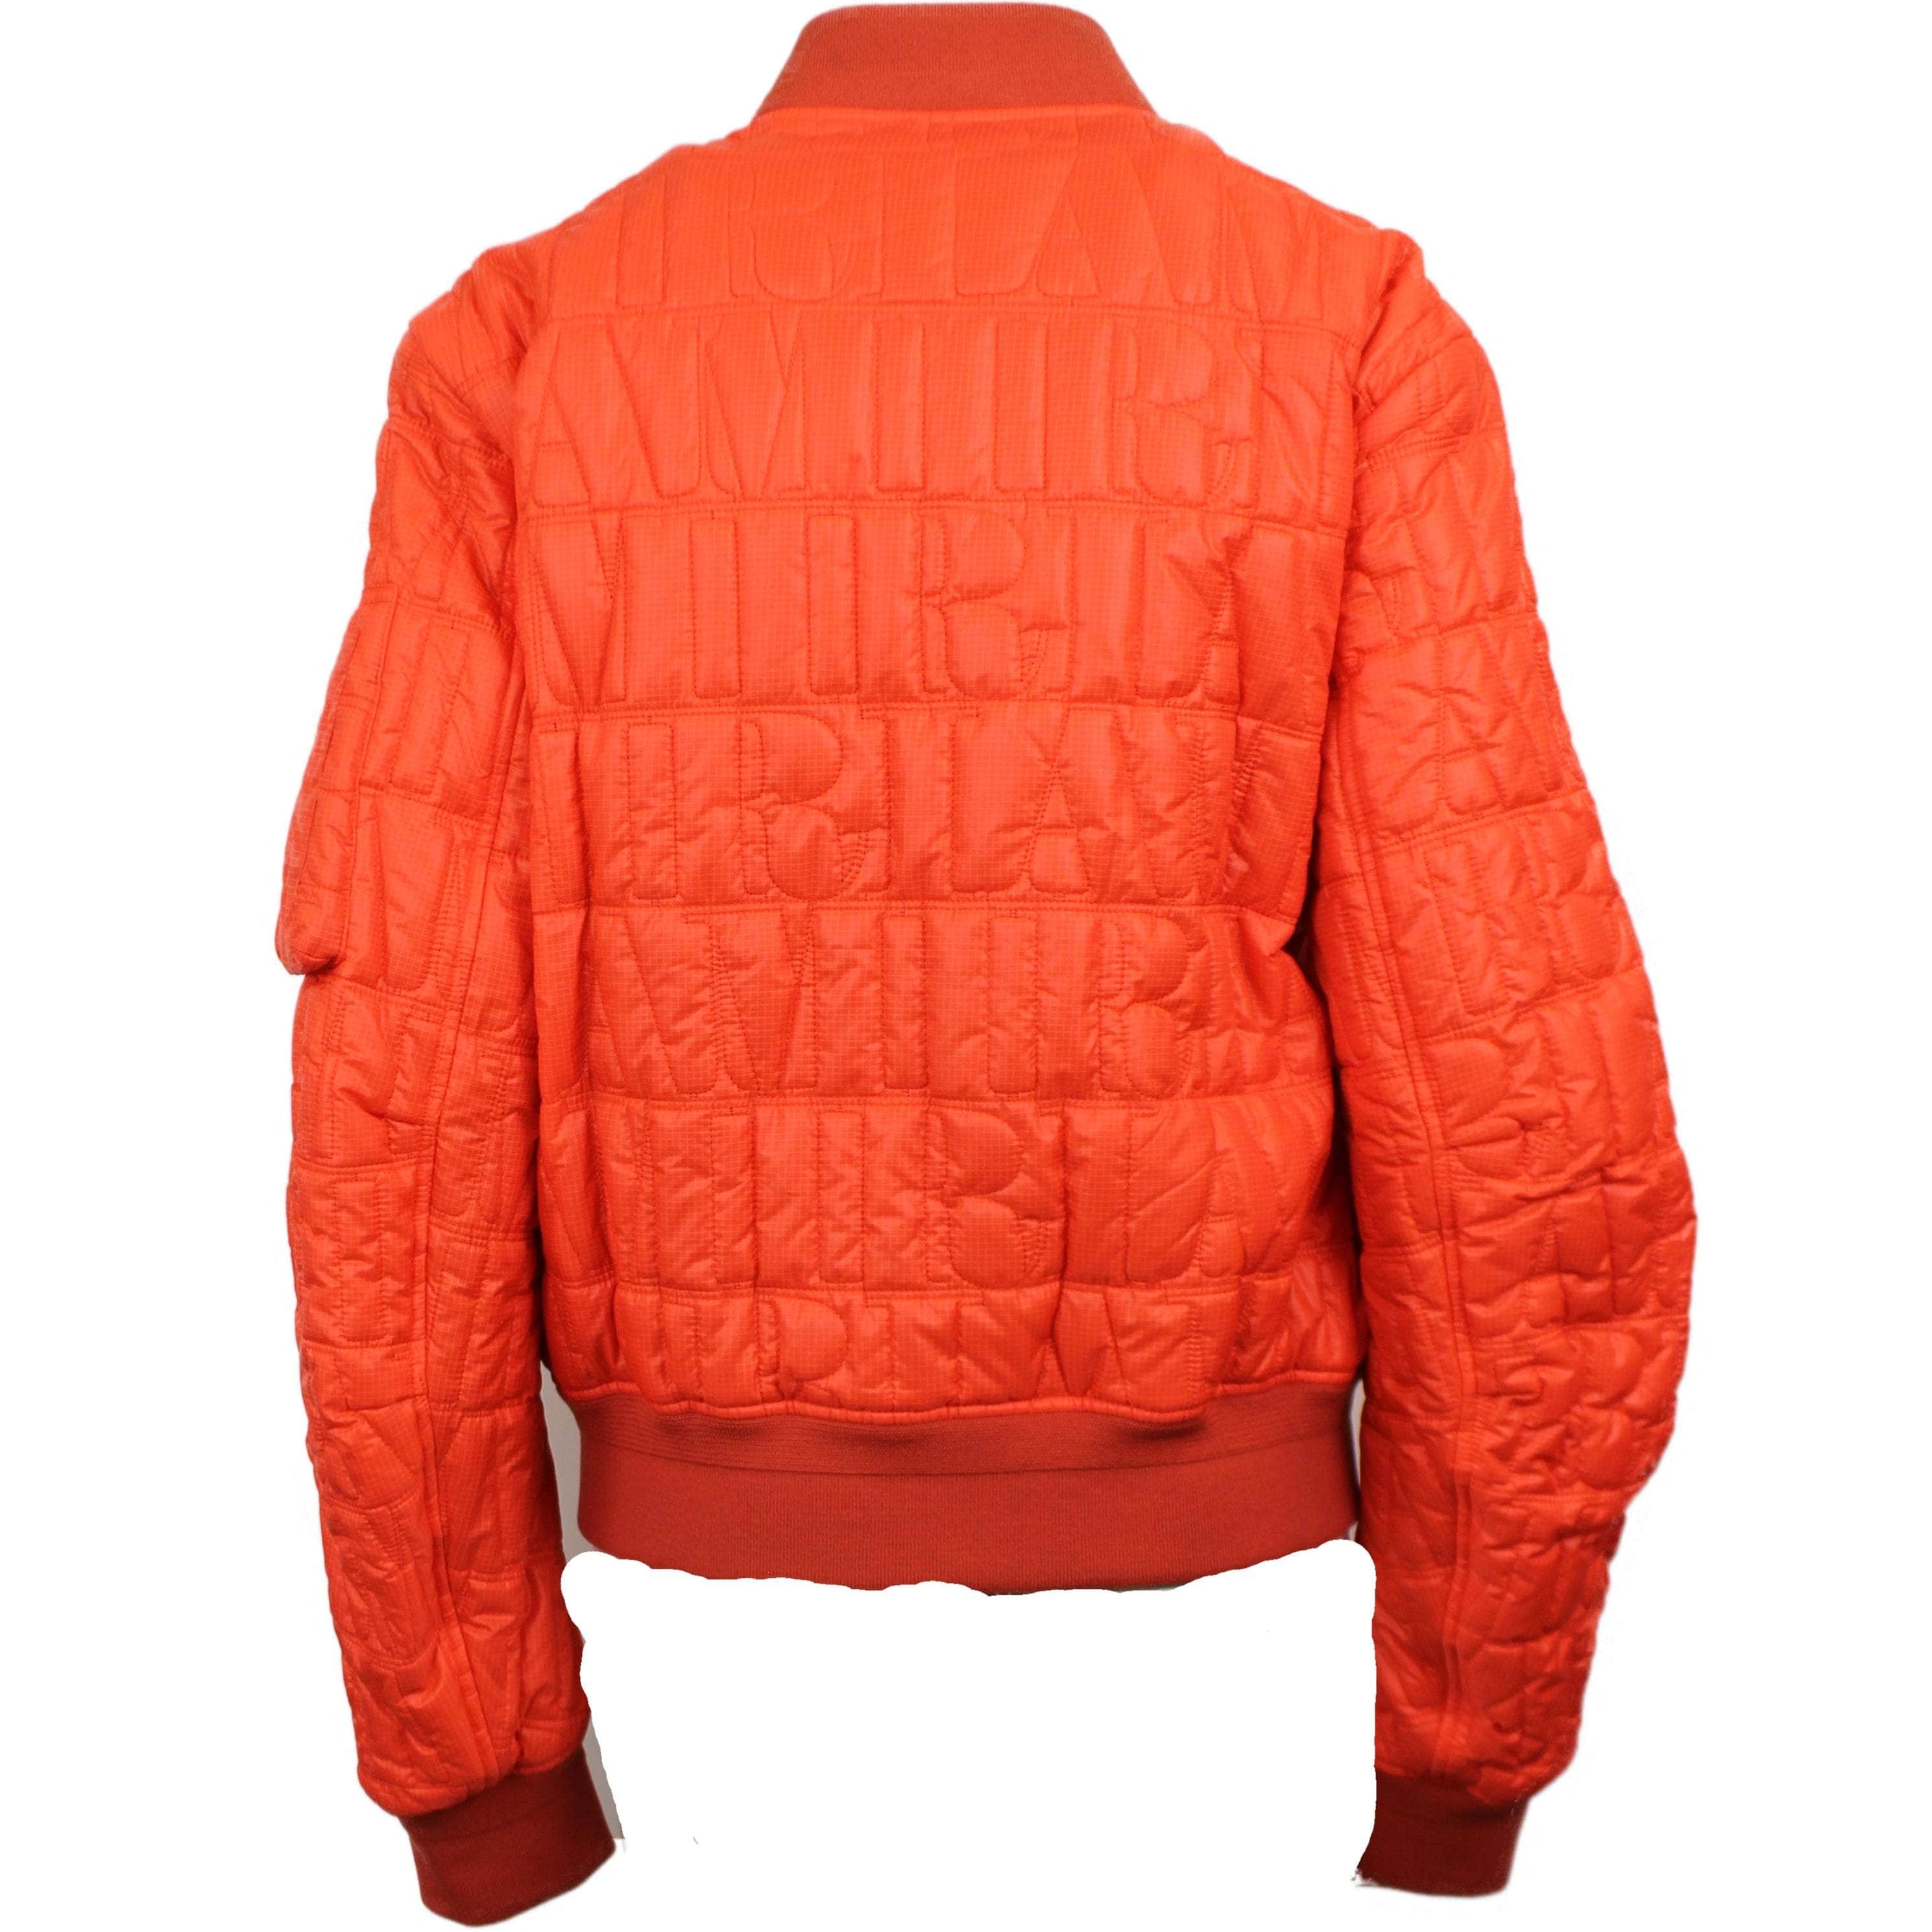 Amiri 1000-2000, amiri, channelenable-all, chicmi, couponcollection, main-clothing, mens-bombers, shop375, Stadium Goods Orange QUILTED LOGO Jacket Bomber